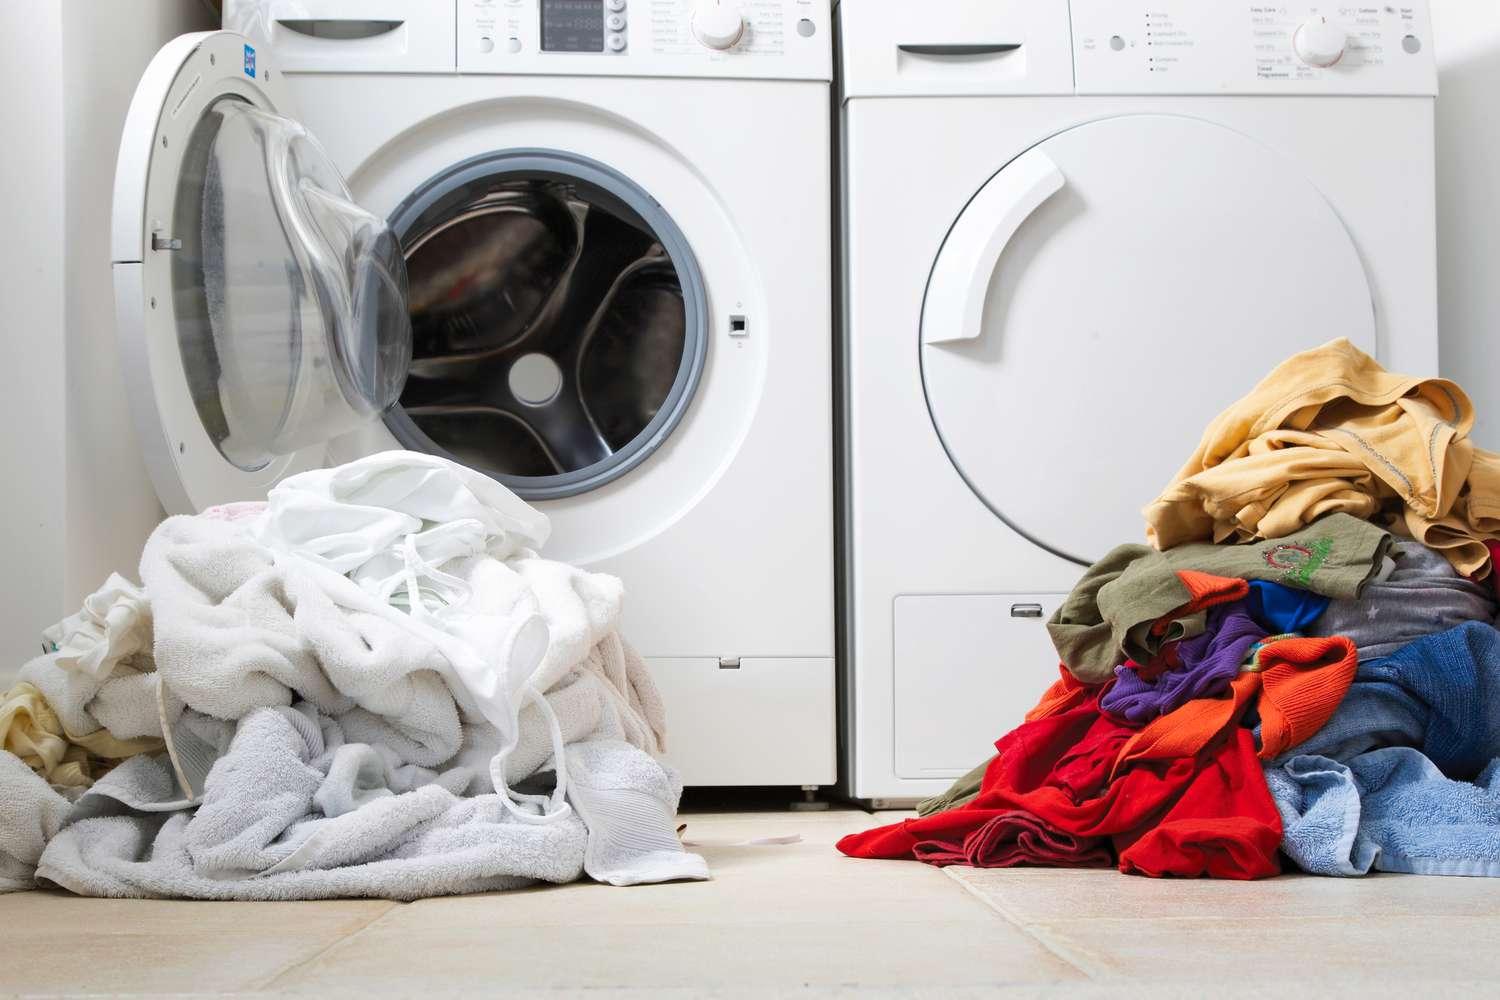 Laundry services for restaurants, cafes and hotels. Pick up 